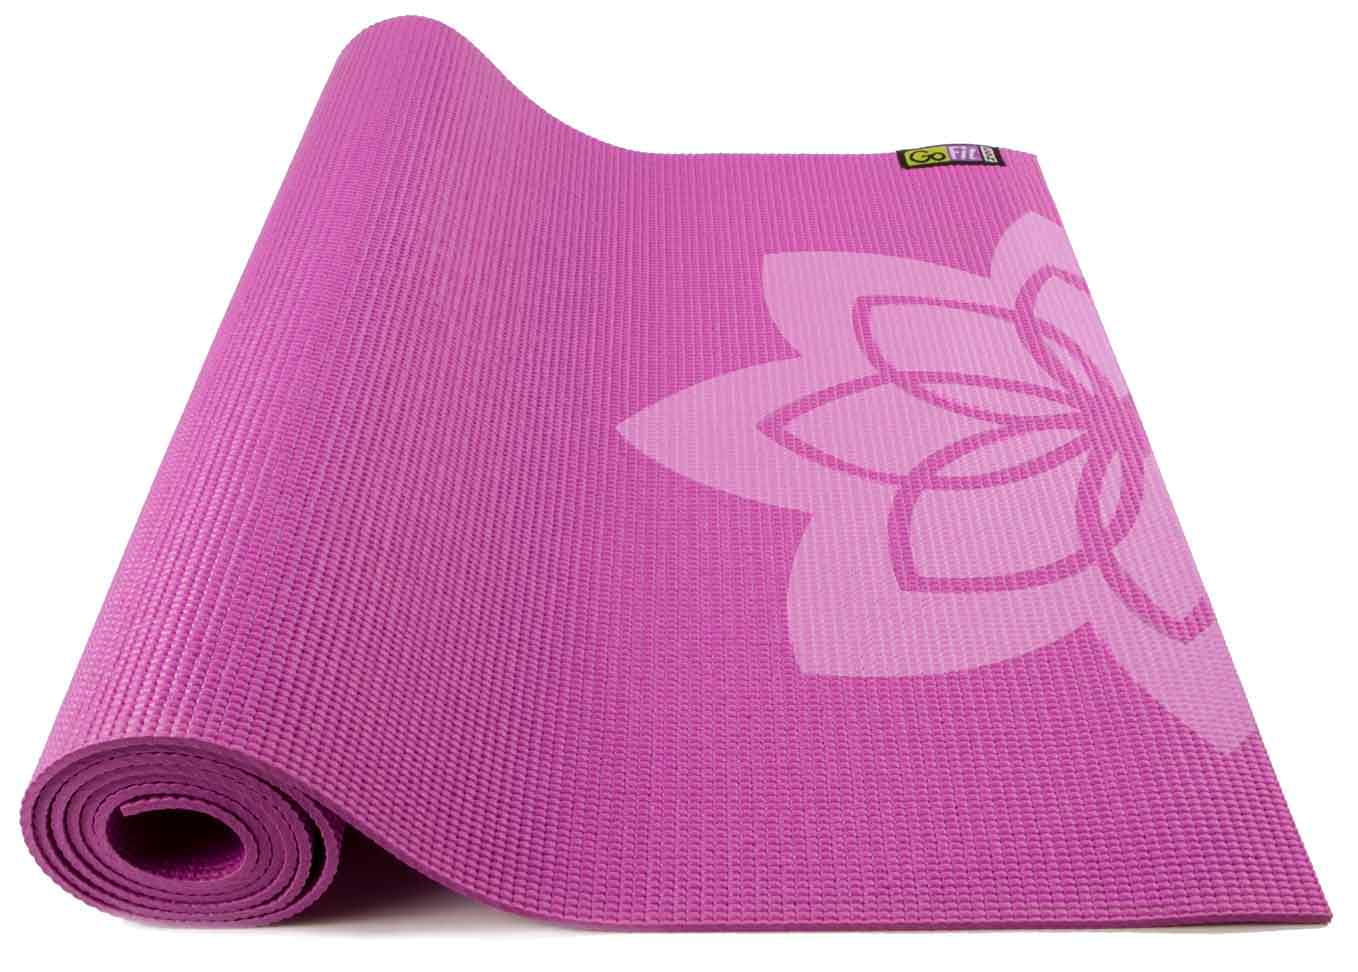 ProsourceFit Yoga Mats 3/16 in (5mm) Thick w/ Exclusive Printed Designs